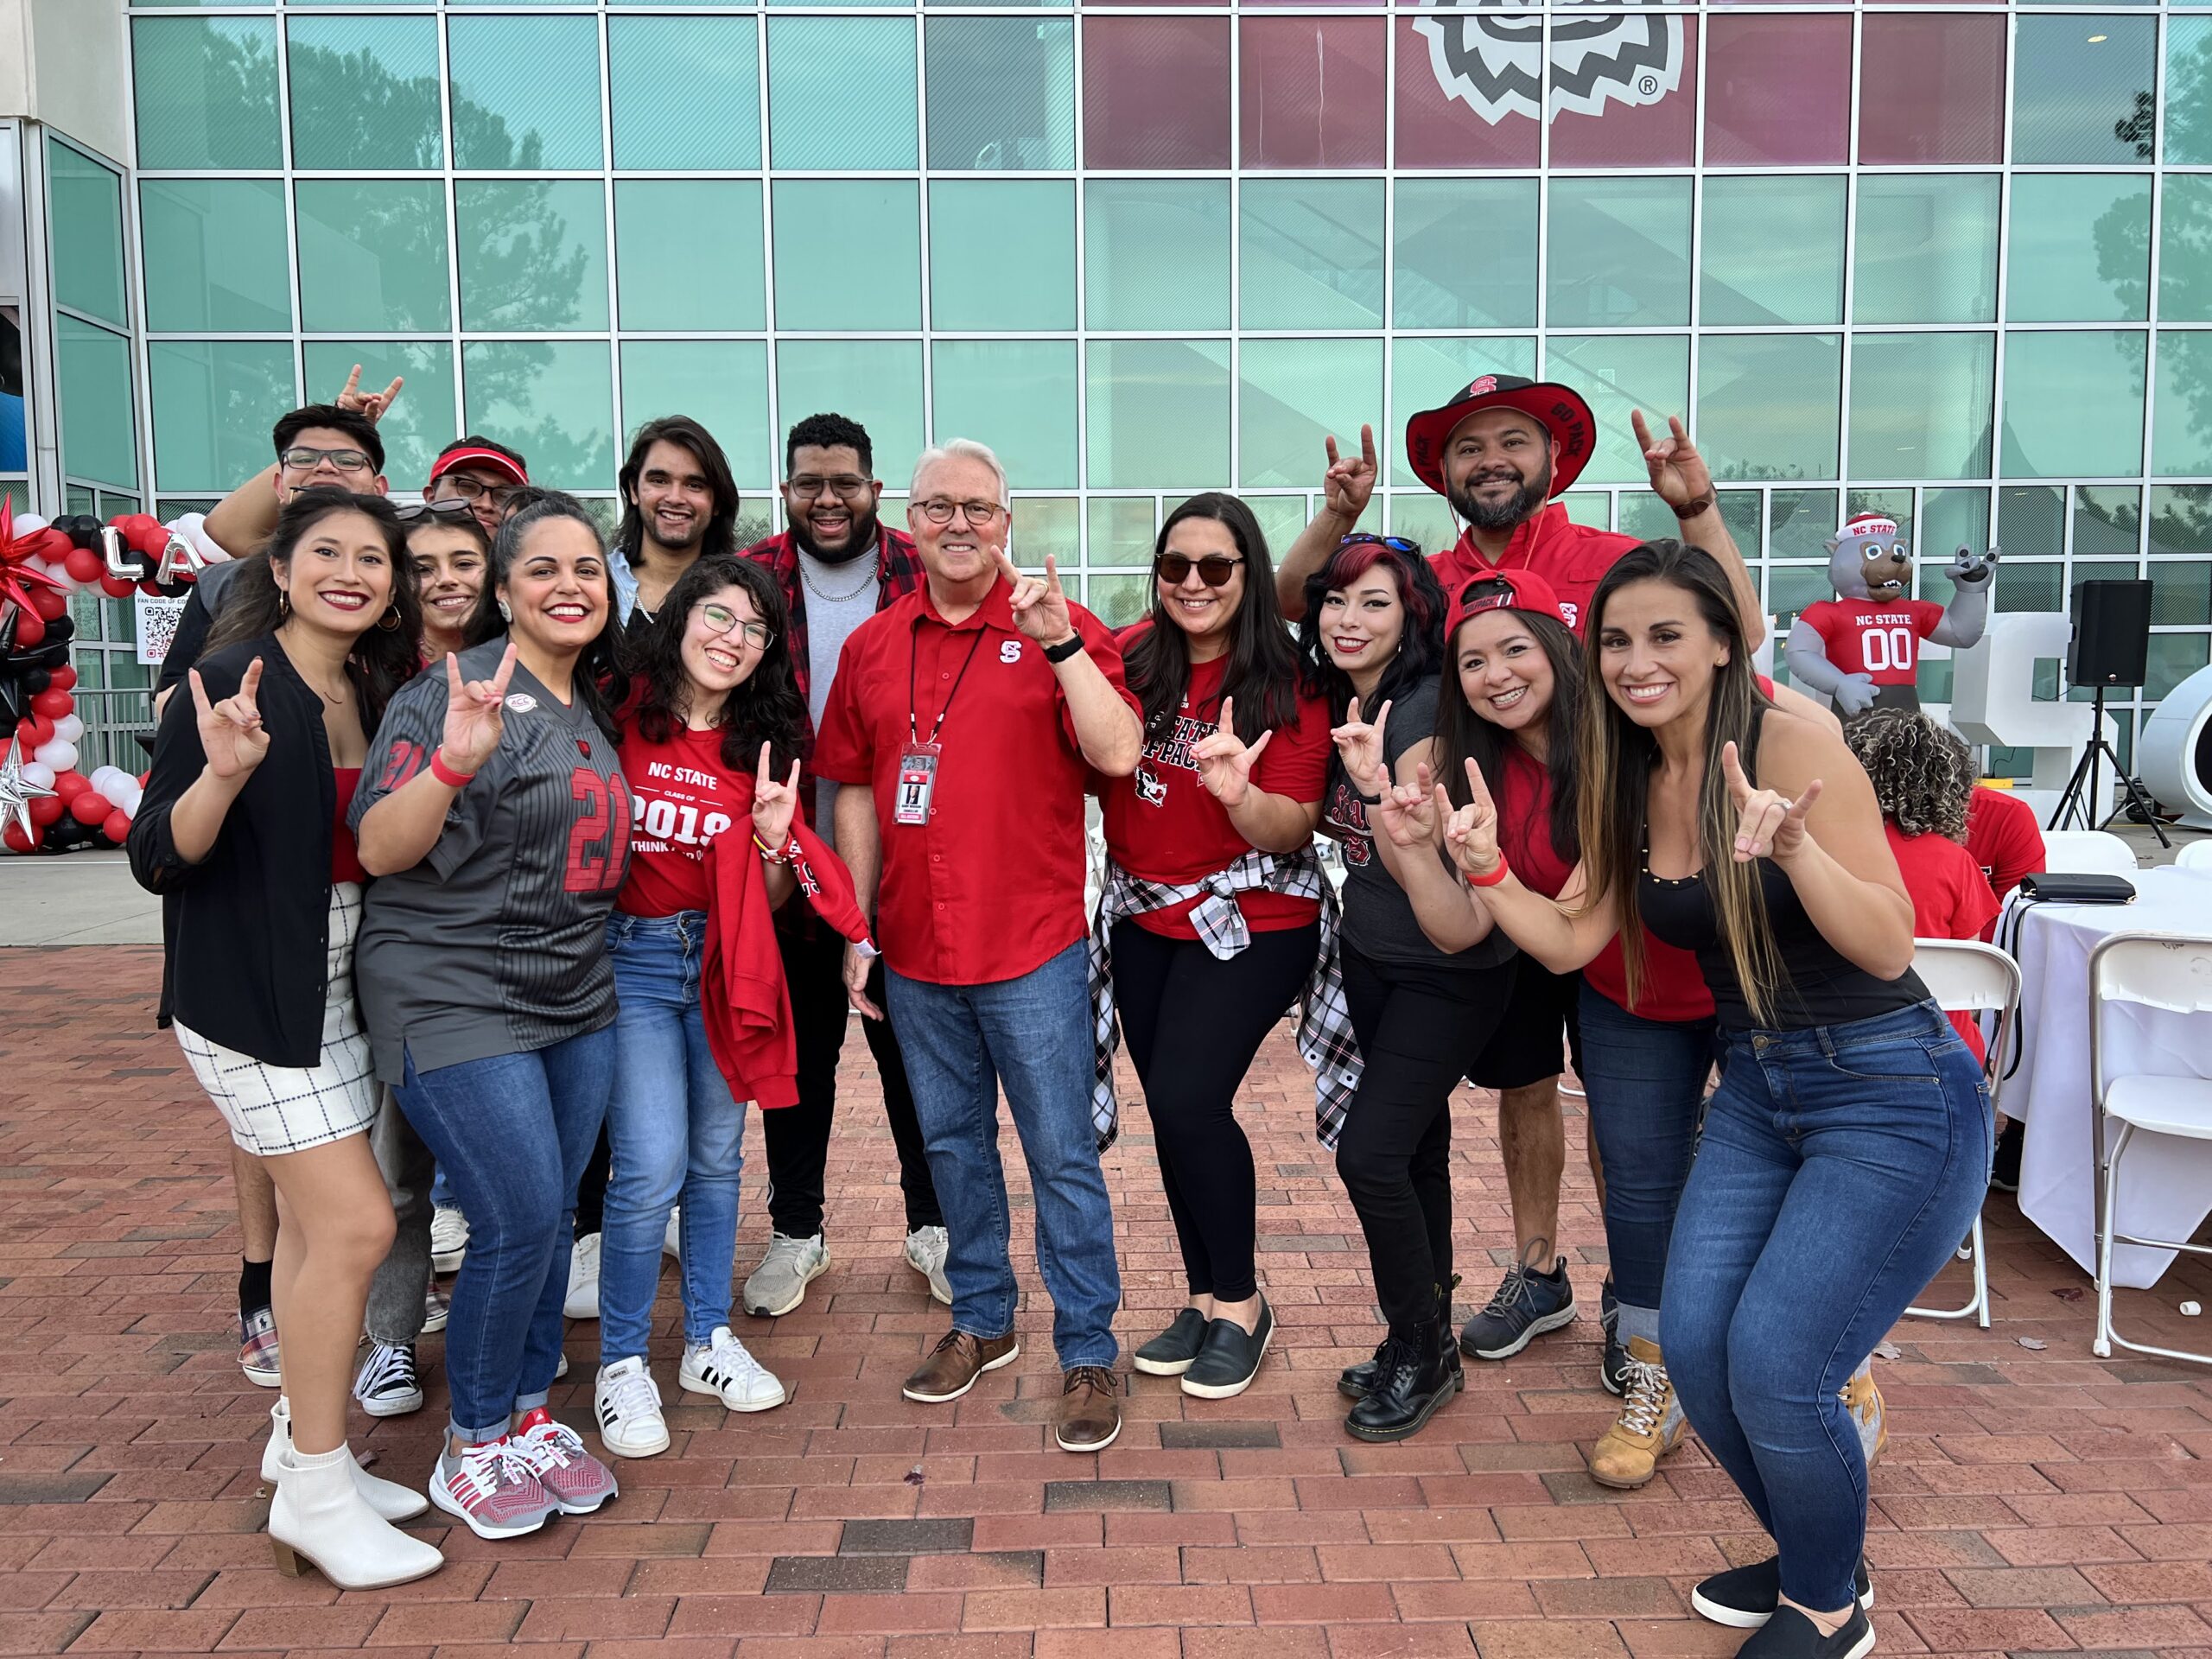 The Chancellor posing with LAN members outside of Carter-Finley.